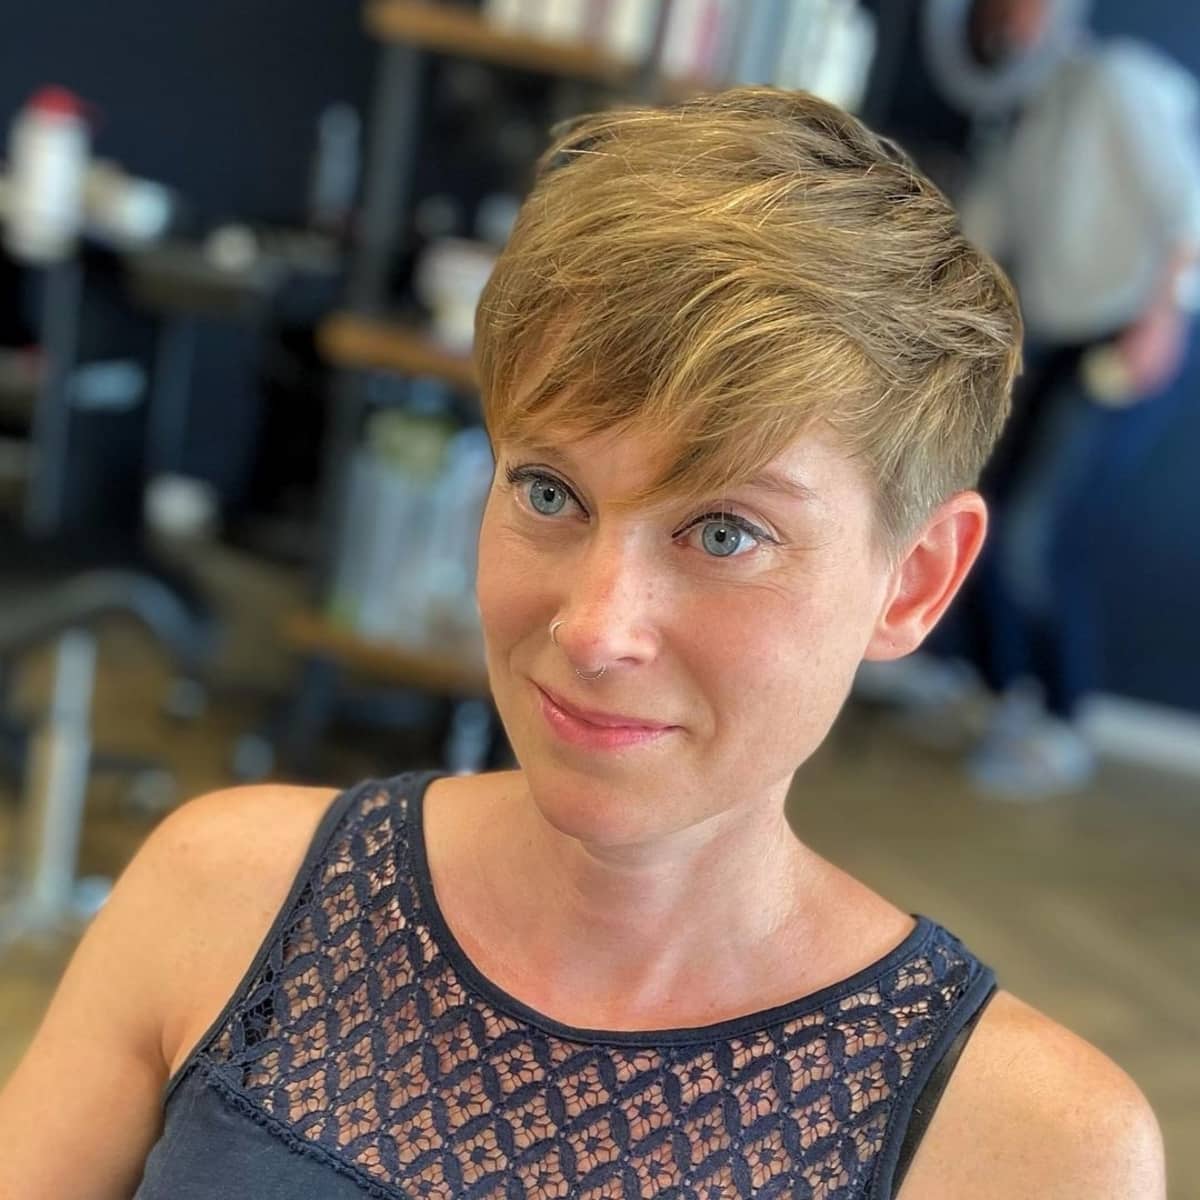 25 Textured Pixie Cut Ideas for a Messy, Modern Look